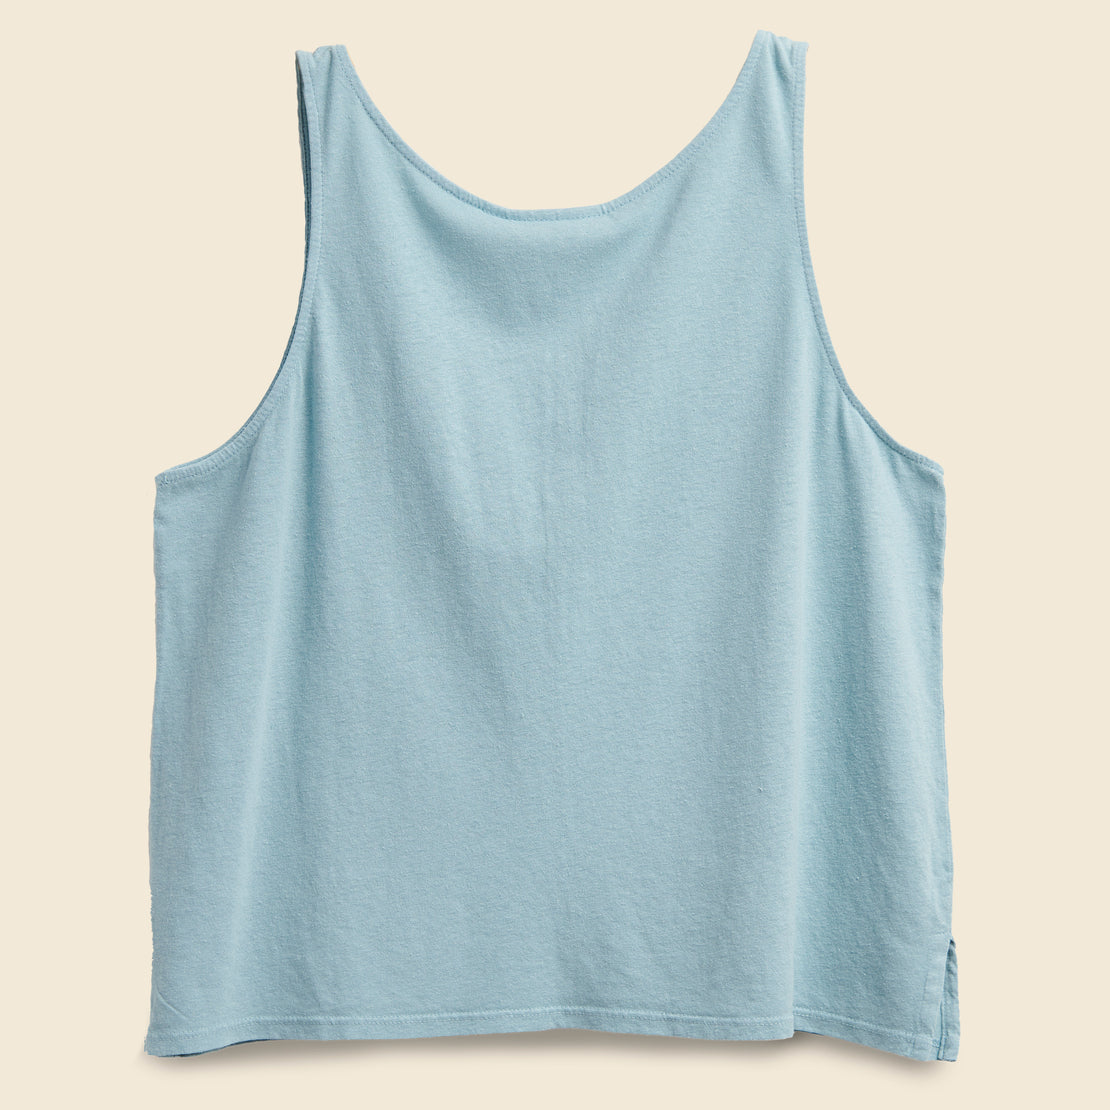 Cropped Tank - Ether Blue - Jungmaven - STAG Provisions - W - Tops - Sleeveless